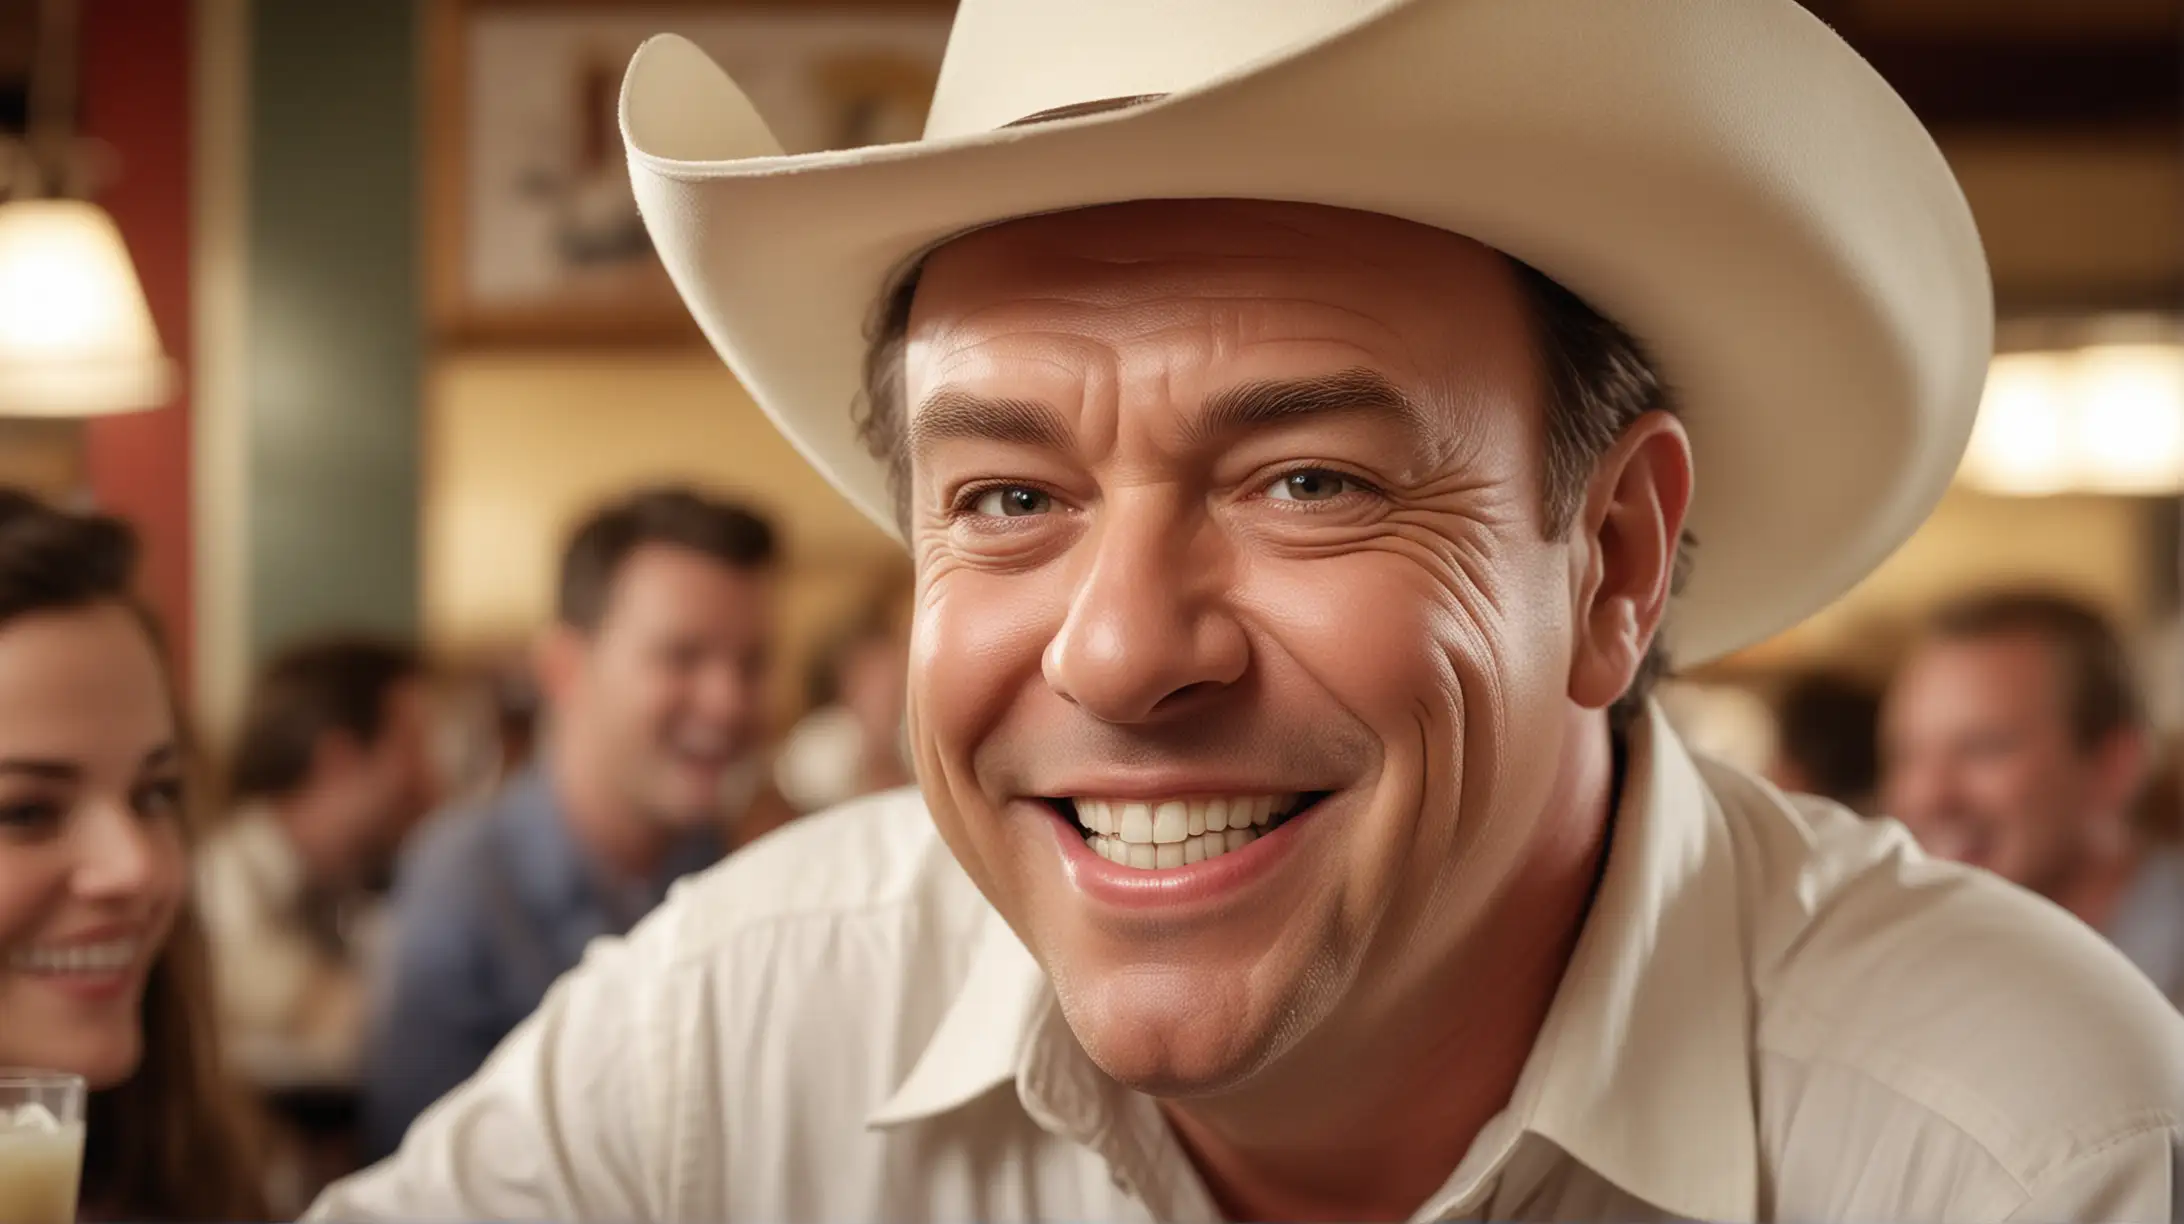 CLASSIC CLOSE UP PORTRAIT PHOTOGRAPHY STYLE, actor Tom Arnold look-alike, goofy, clean white cowboy hat, big smile gap between two front teeth, toothpick dangling from mouth, busy 24 hour diner in background, photo realistic, cinematic lighting